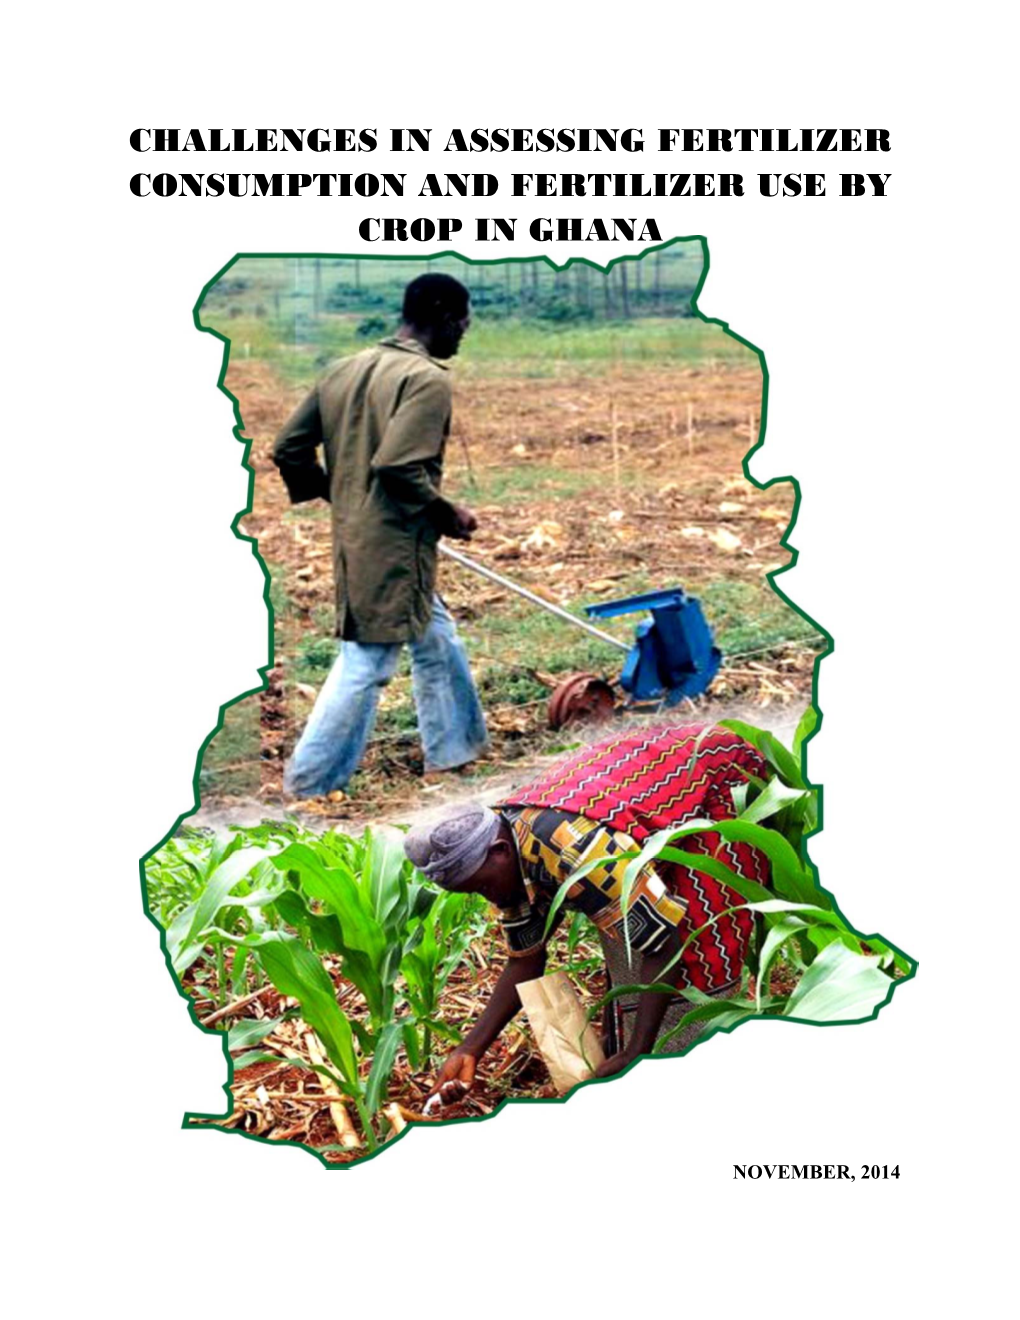 Challenges in Assessing Fertilizer Consumption and Fertilizer Use by Crop in Ghana